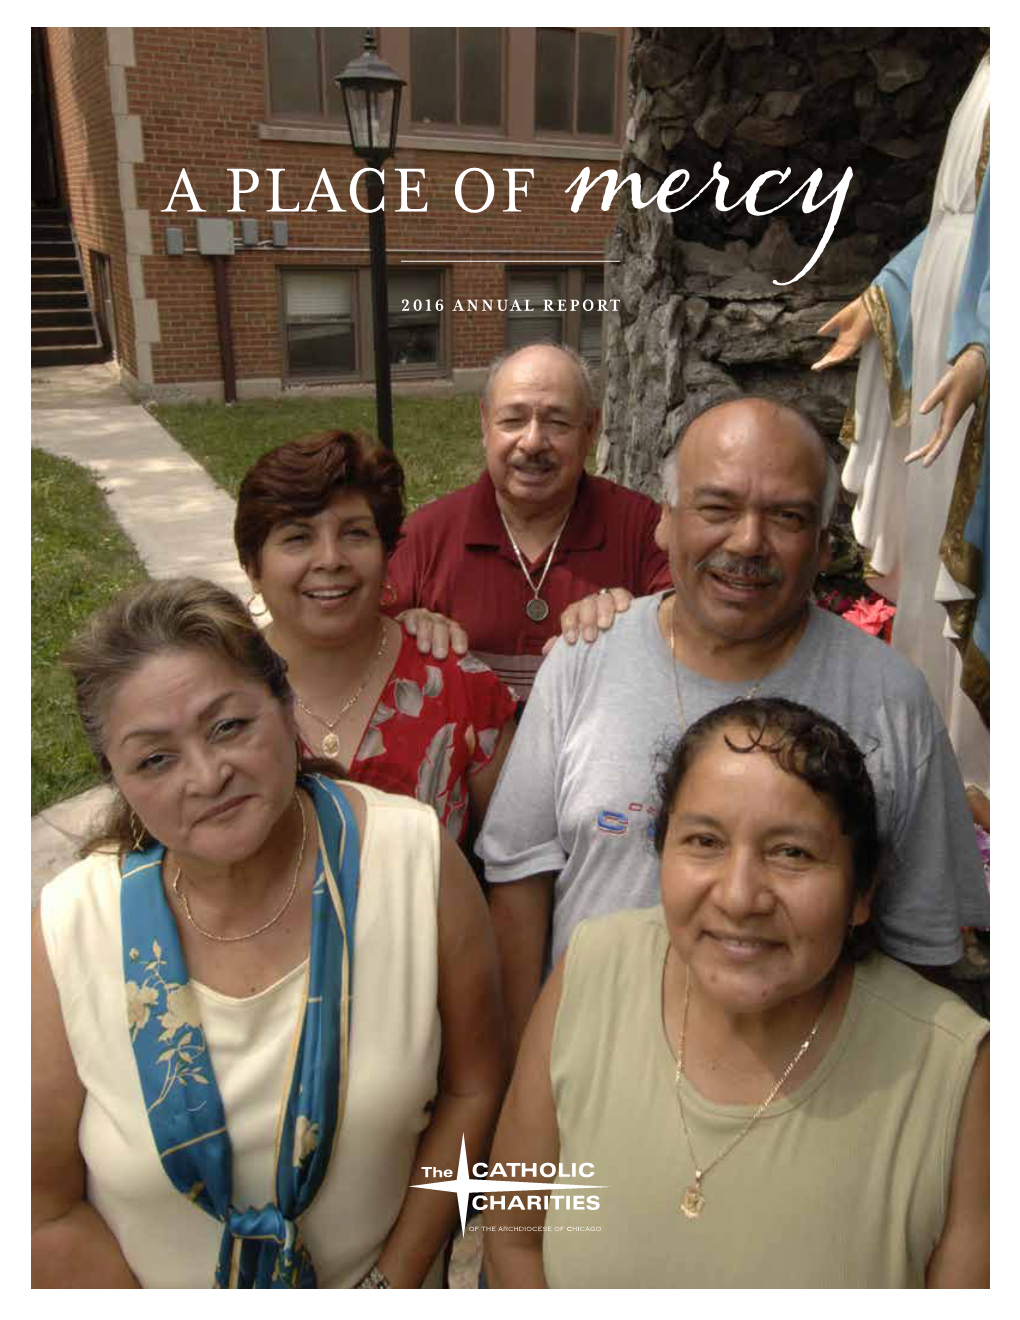 A Place of Mercy—A Fitting Theme for the Following Pages of Catholic Charities 2016 Annual Report